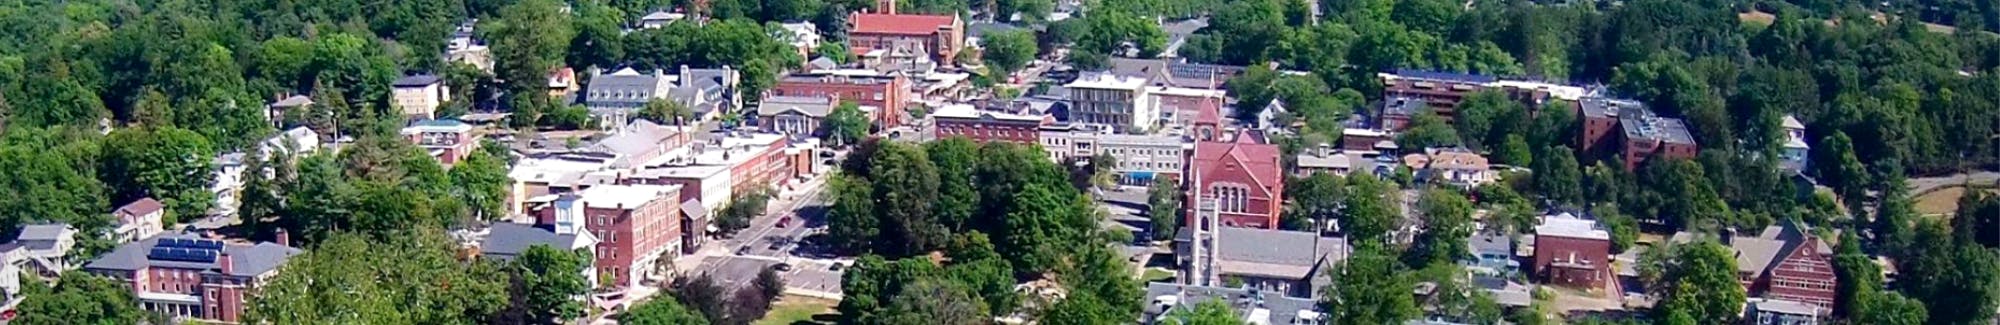 Aerial image of downtown Amherst, Ma in spring time with green trees